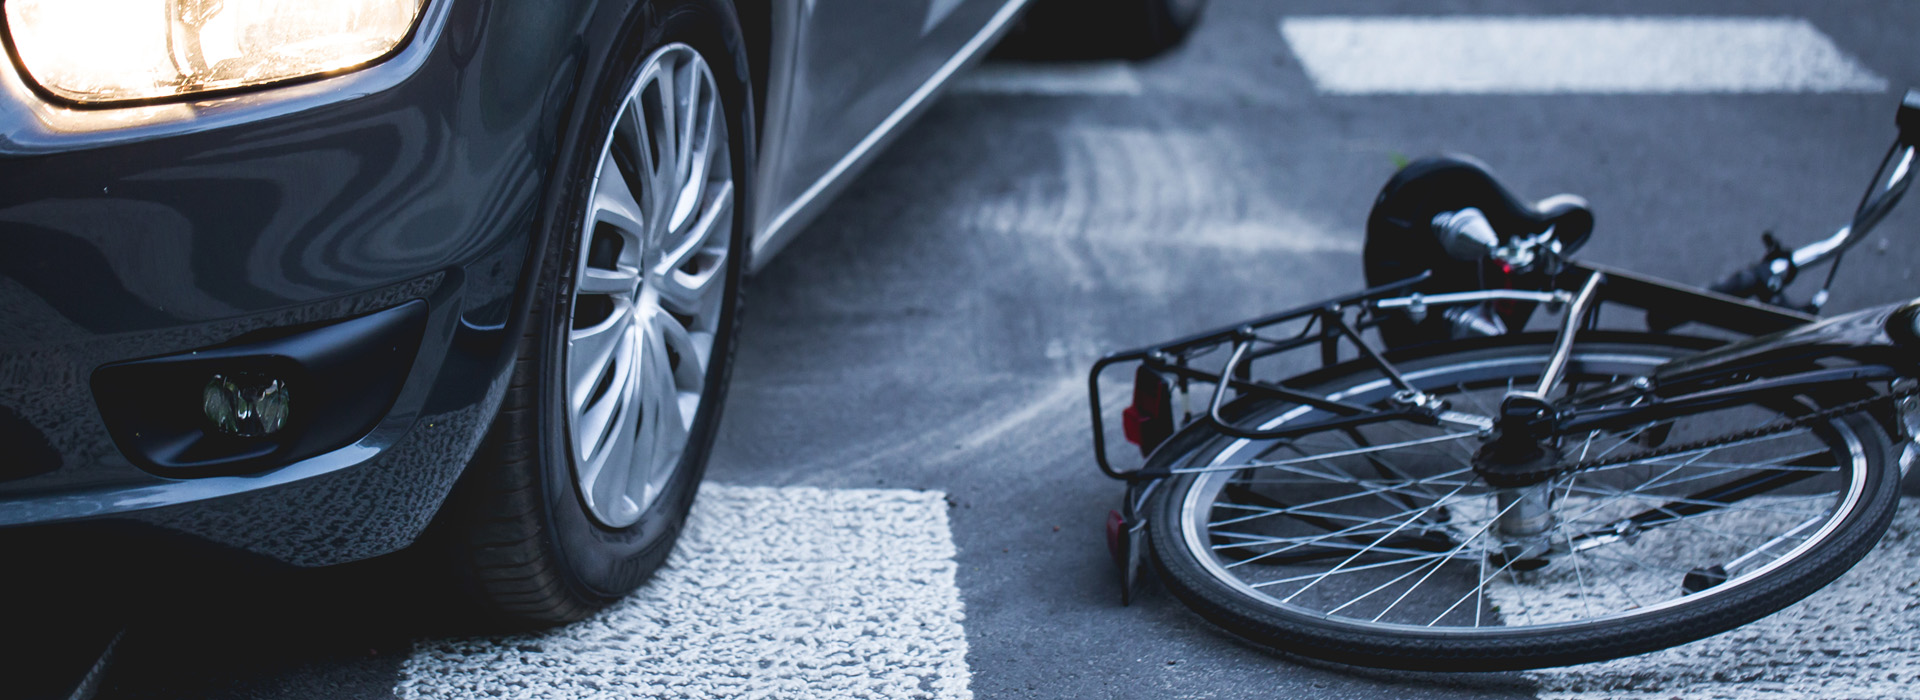 Bike Accidents and Car Collisions